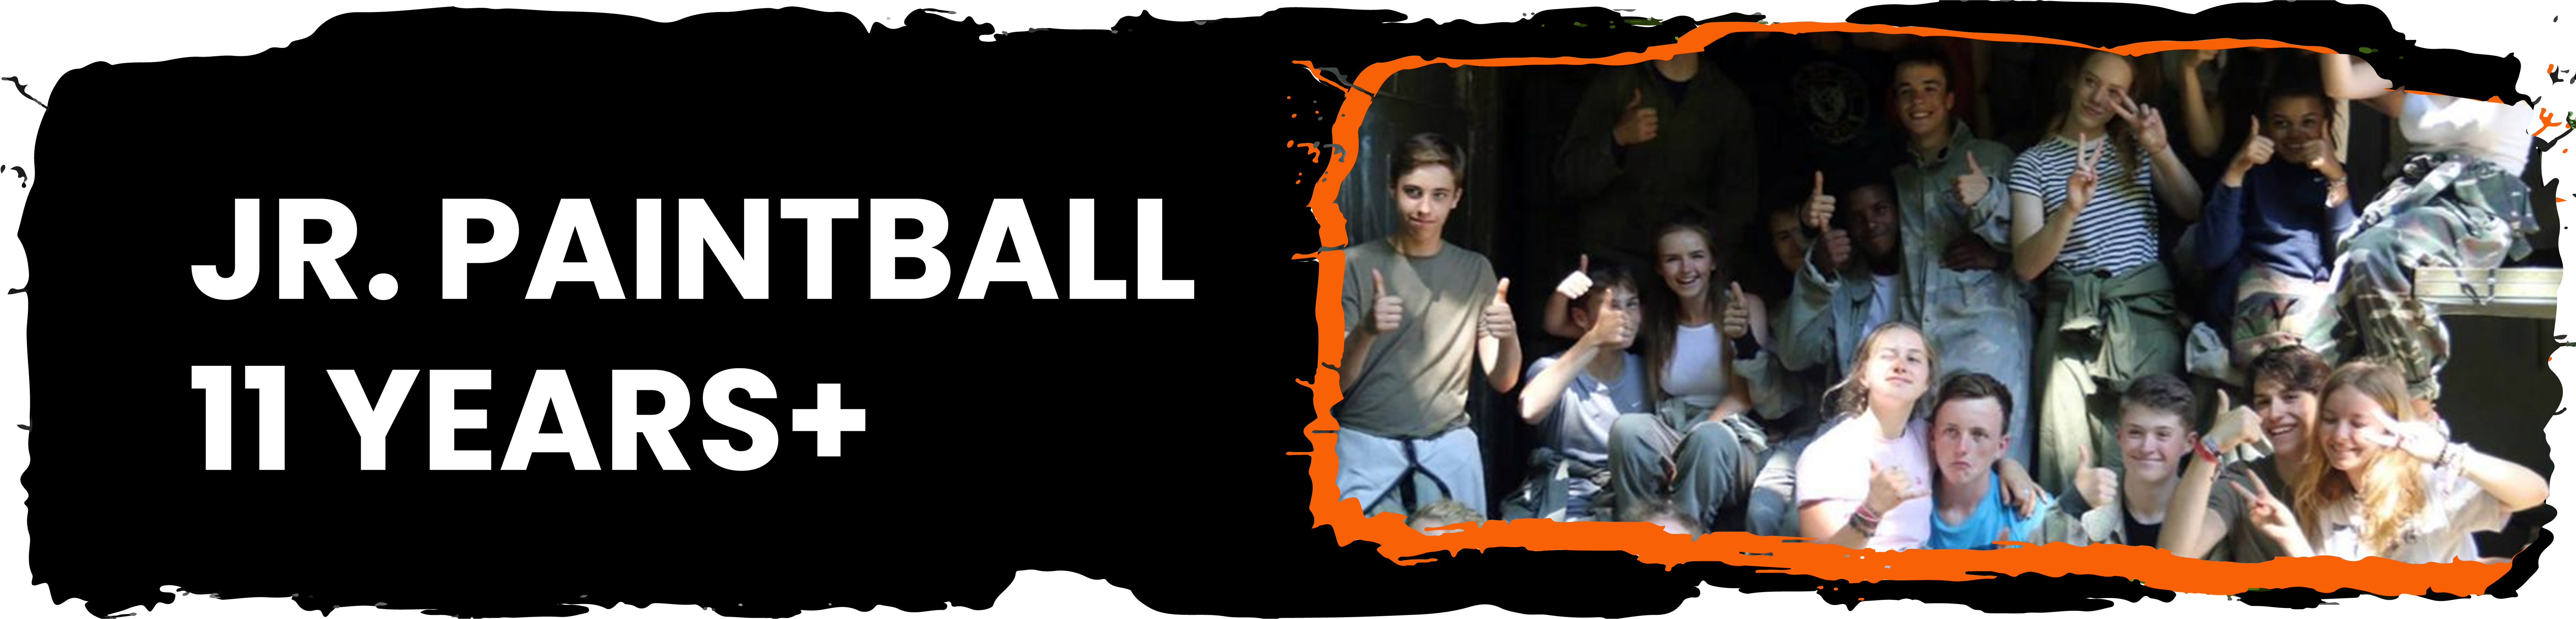 Great Prices From Only £25 Per Junior With 300 paintballs,